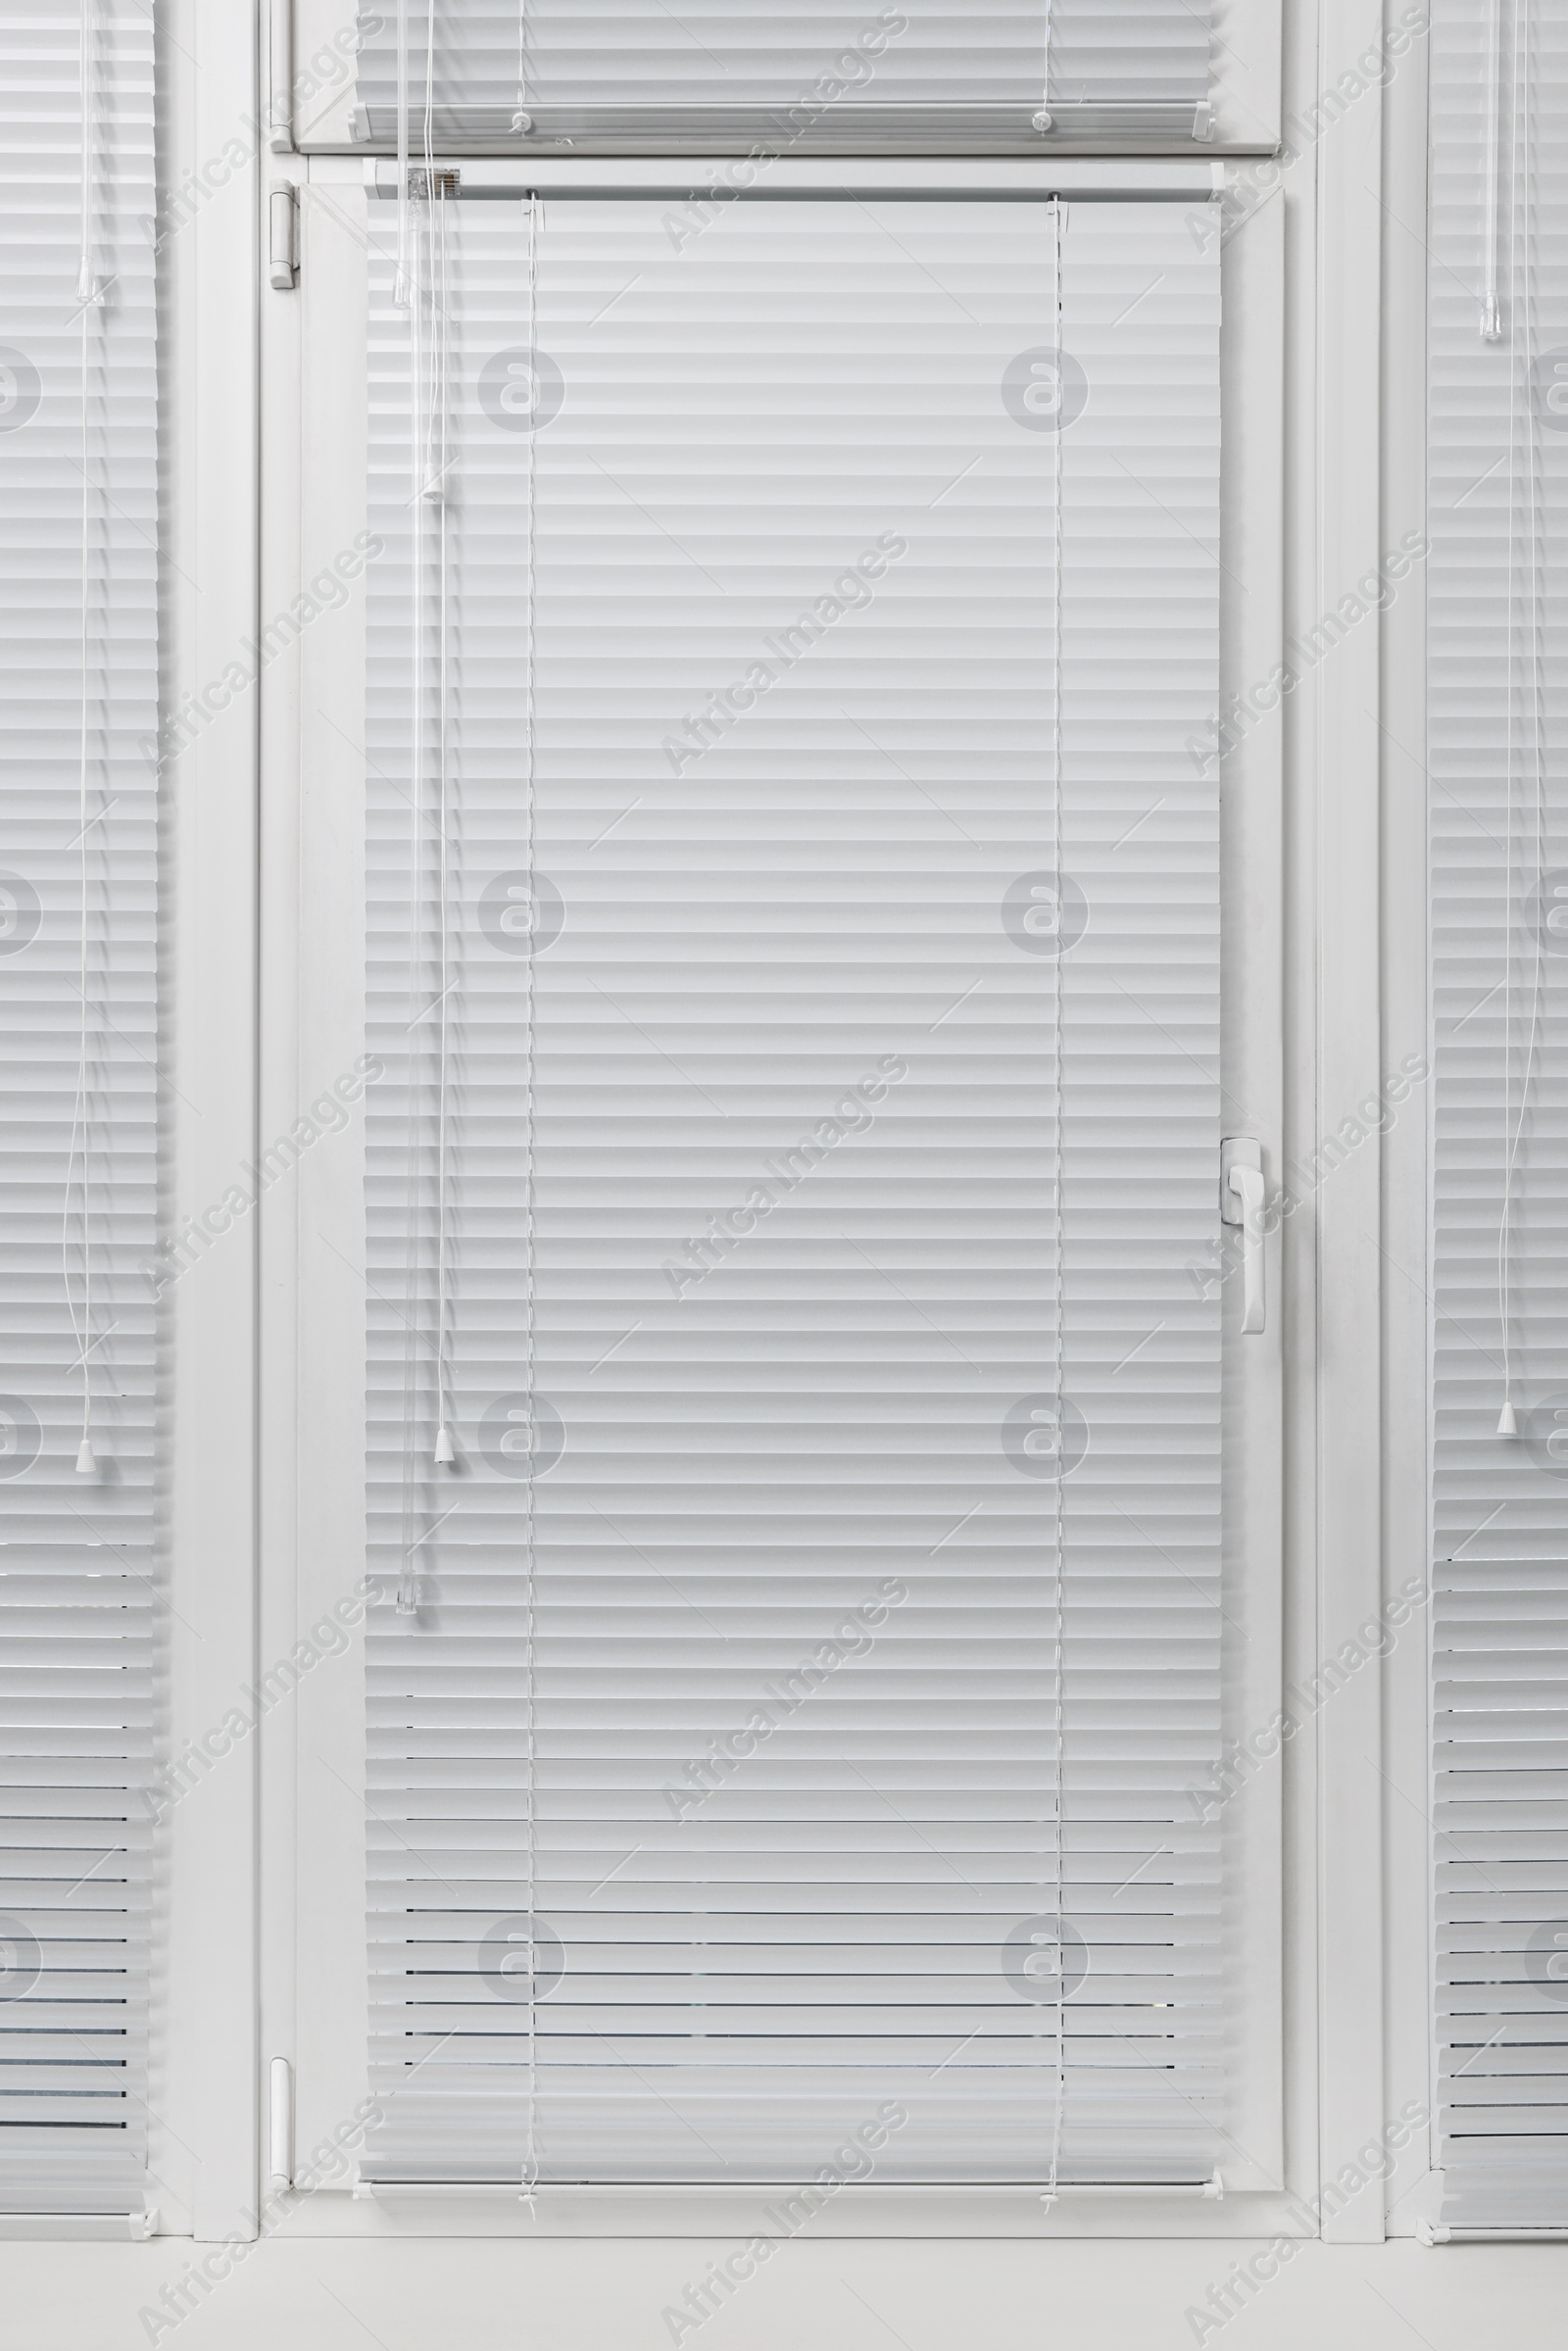 Photo of Window with closed white horizontal blinds indoors